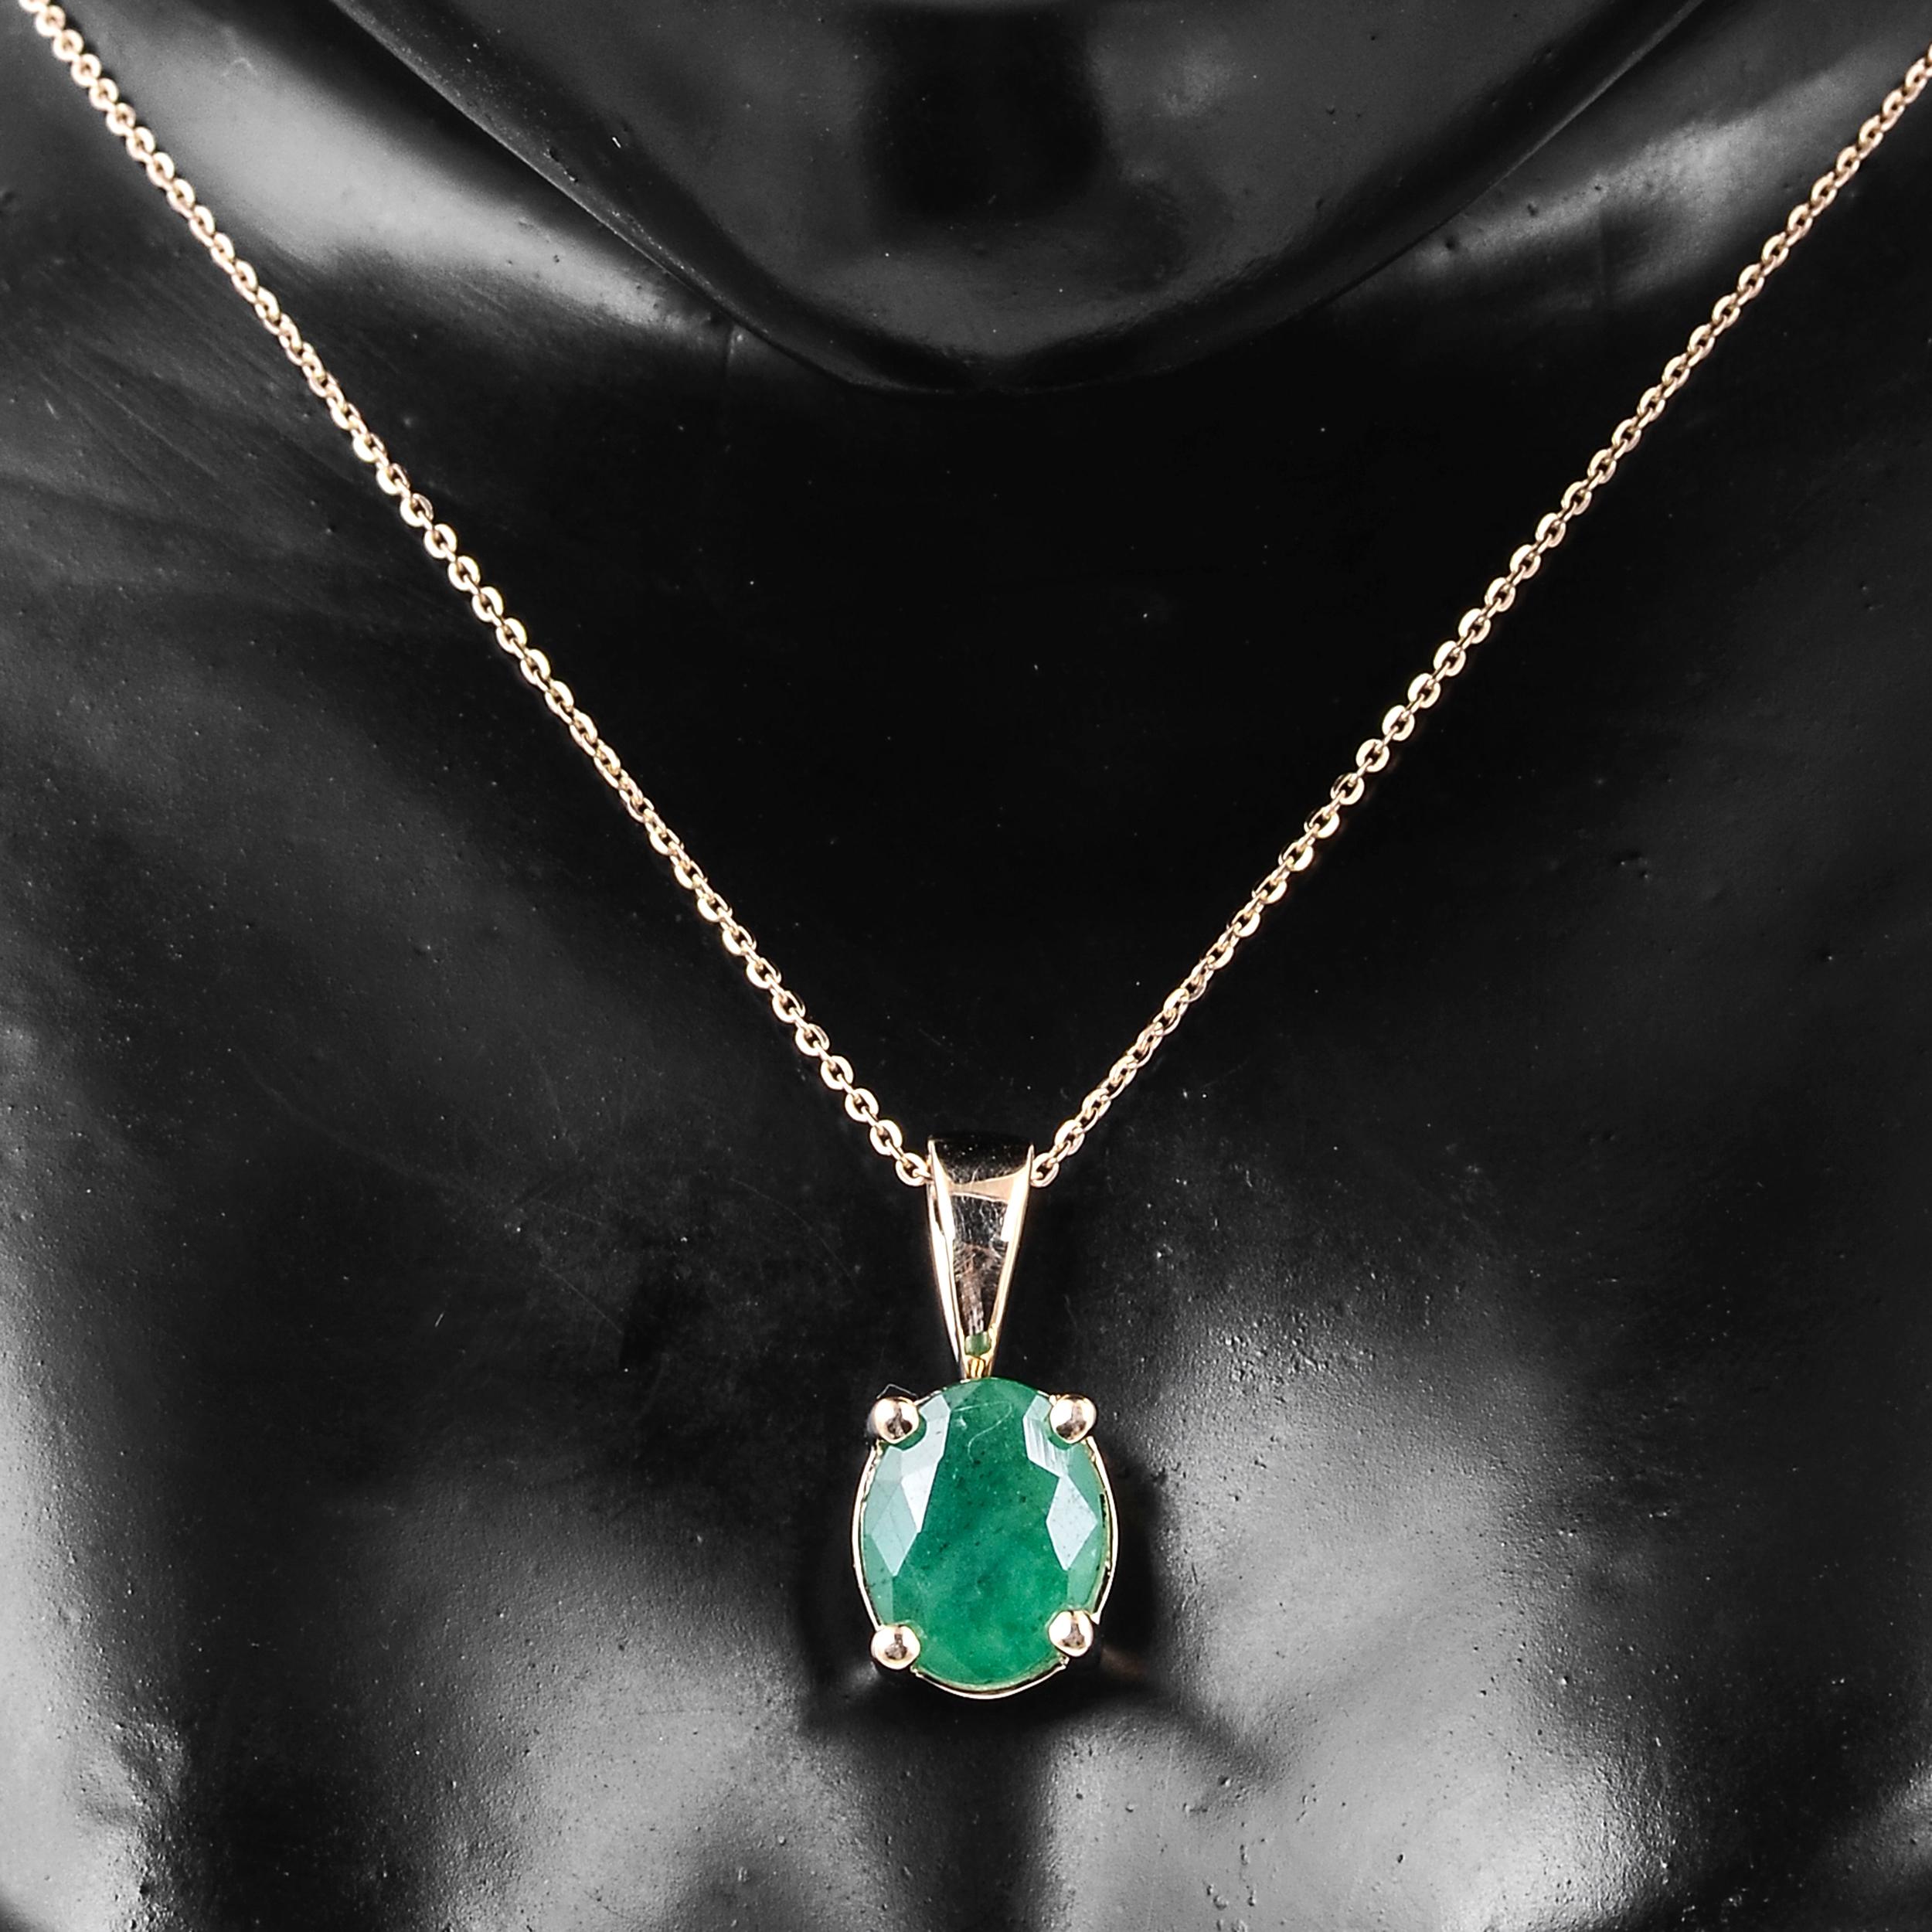 Immerse yourself in the enchanting allure of nature with our Forest Ferns Emerald Pendant from the house. This exquisite piece is a captivating ode to the verdant forests that cover our planet, capturing the essence of lush greenery and the delicate